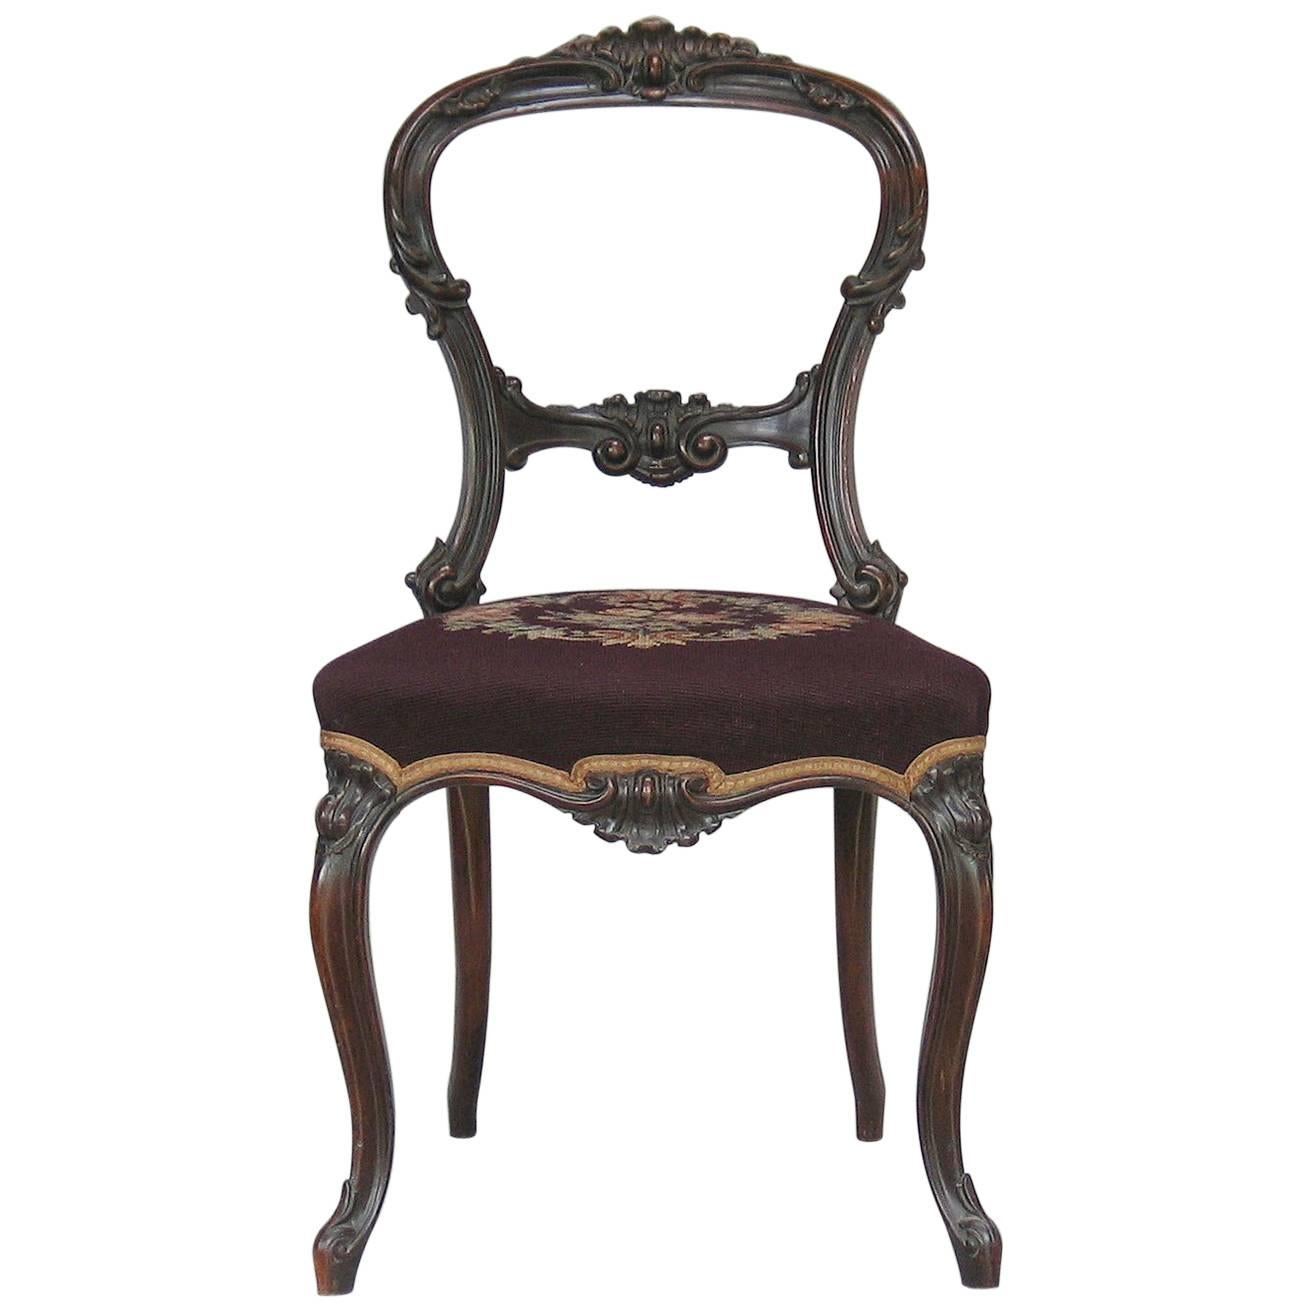 Mid-Victorian Rocco Revival Rosewood Side Chair with Needlepoint Upholstery